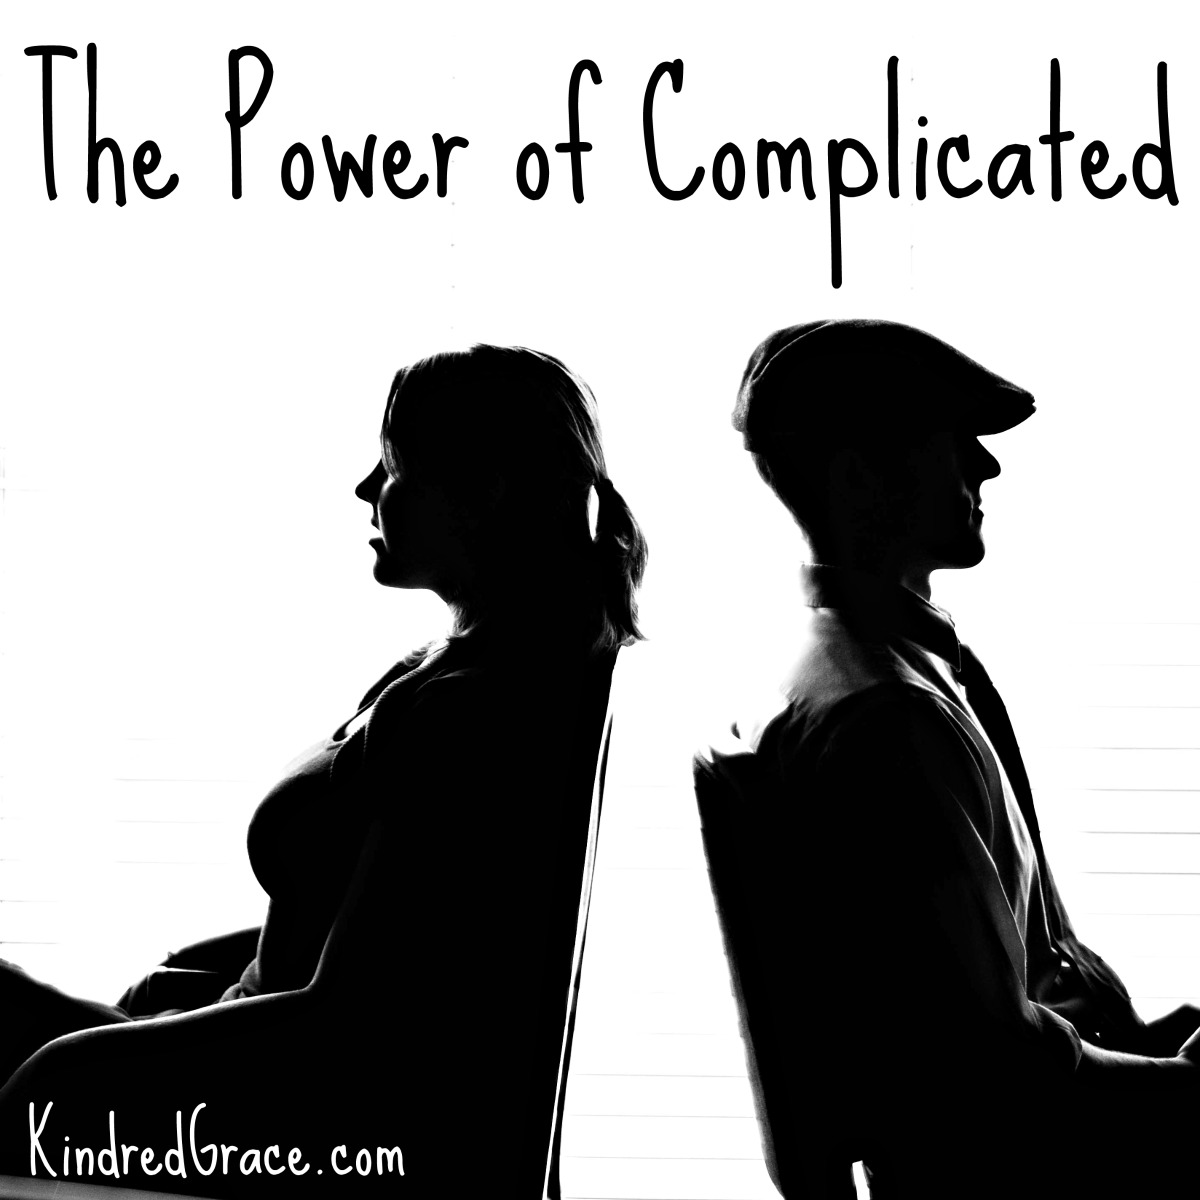 The power of complicated.